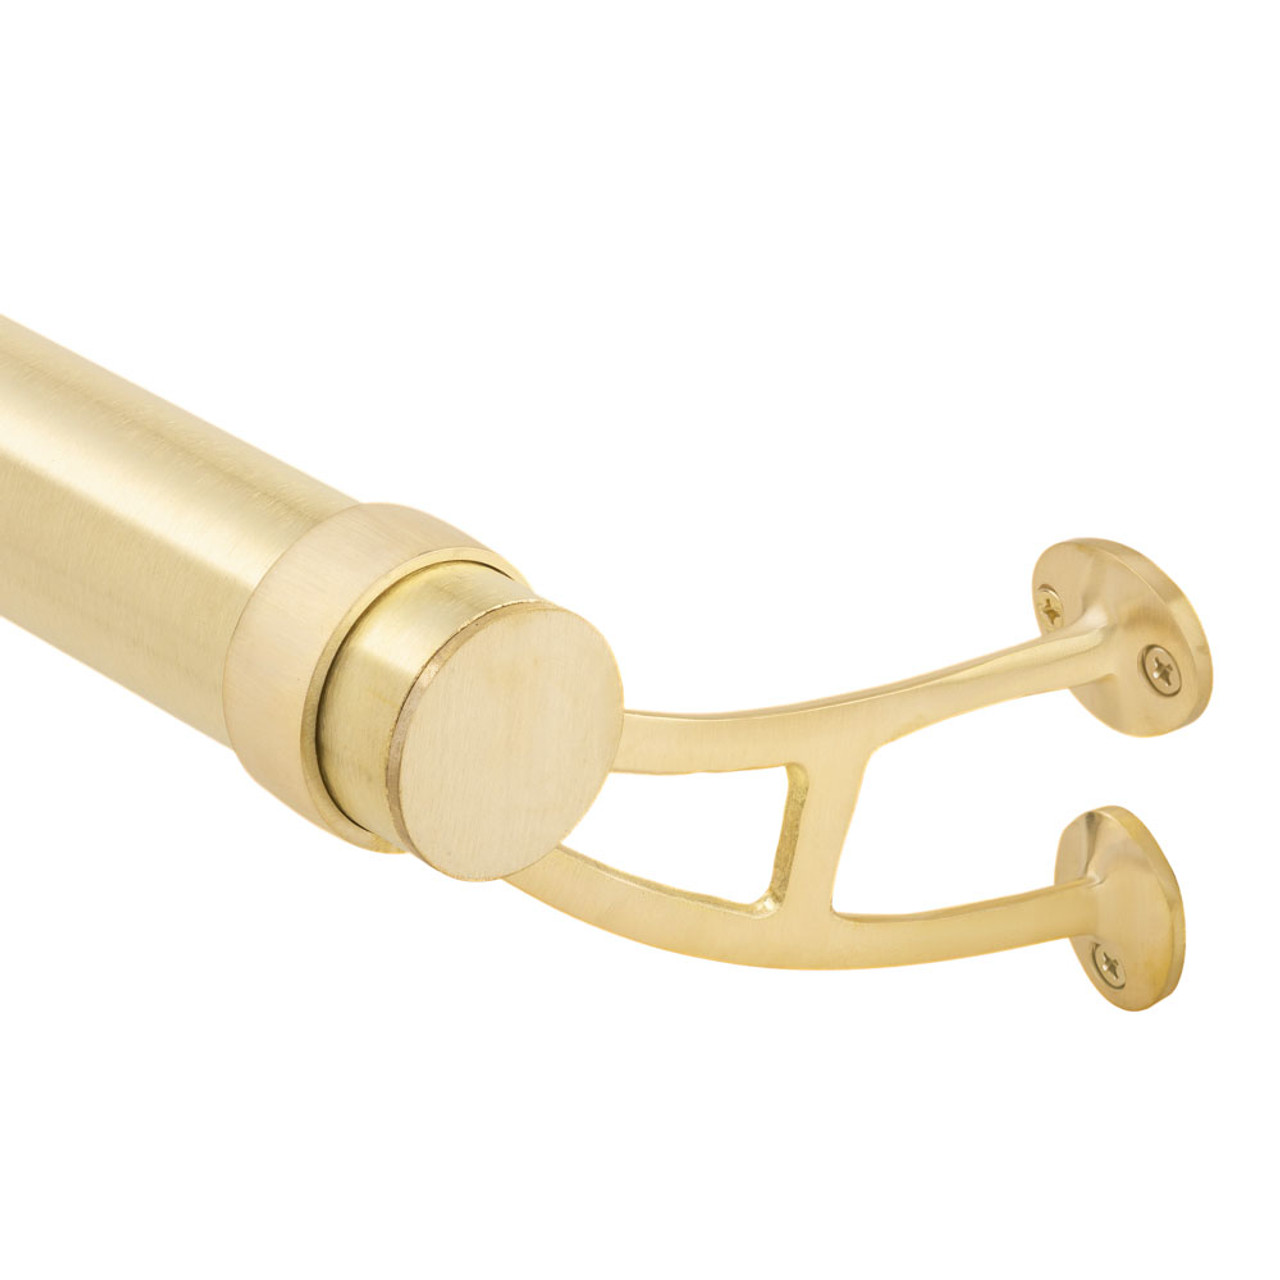 Lavi Industries 2 Bar Bracket, Satin Stainless Steel, Solid Brass &  Stainless Steel Fittings